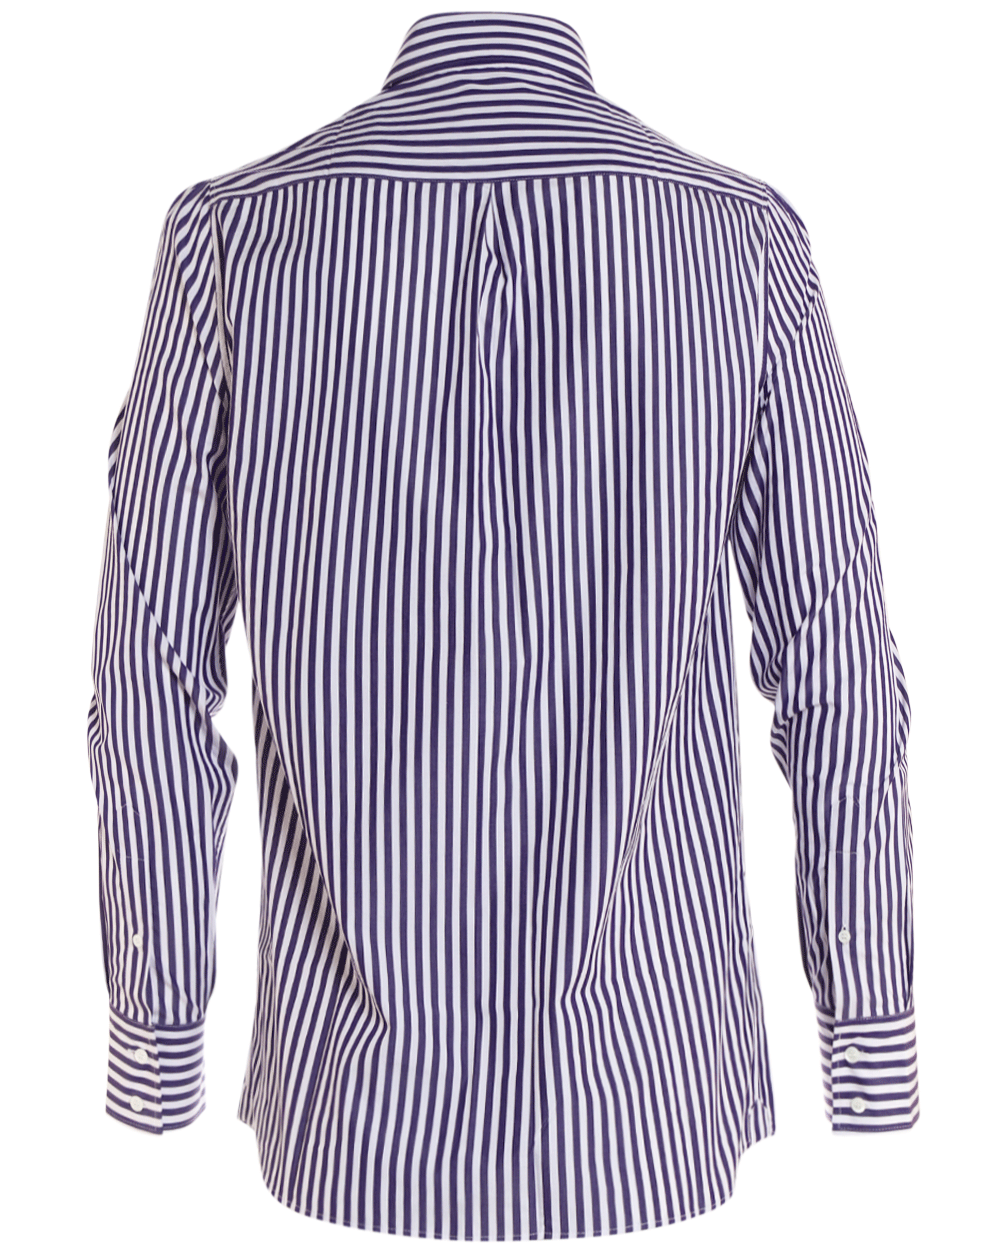 Purple and White Bengal Striped Cotton Sportshirt